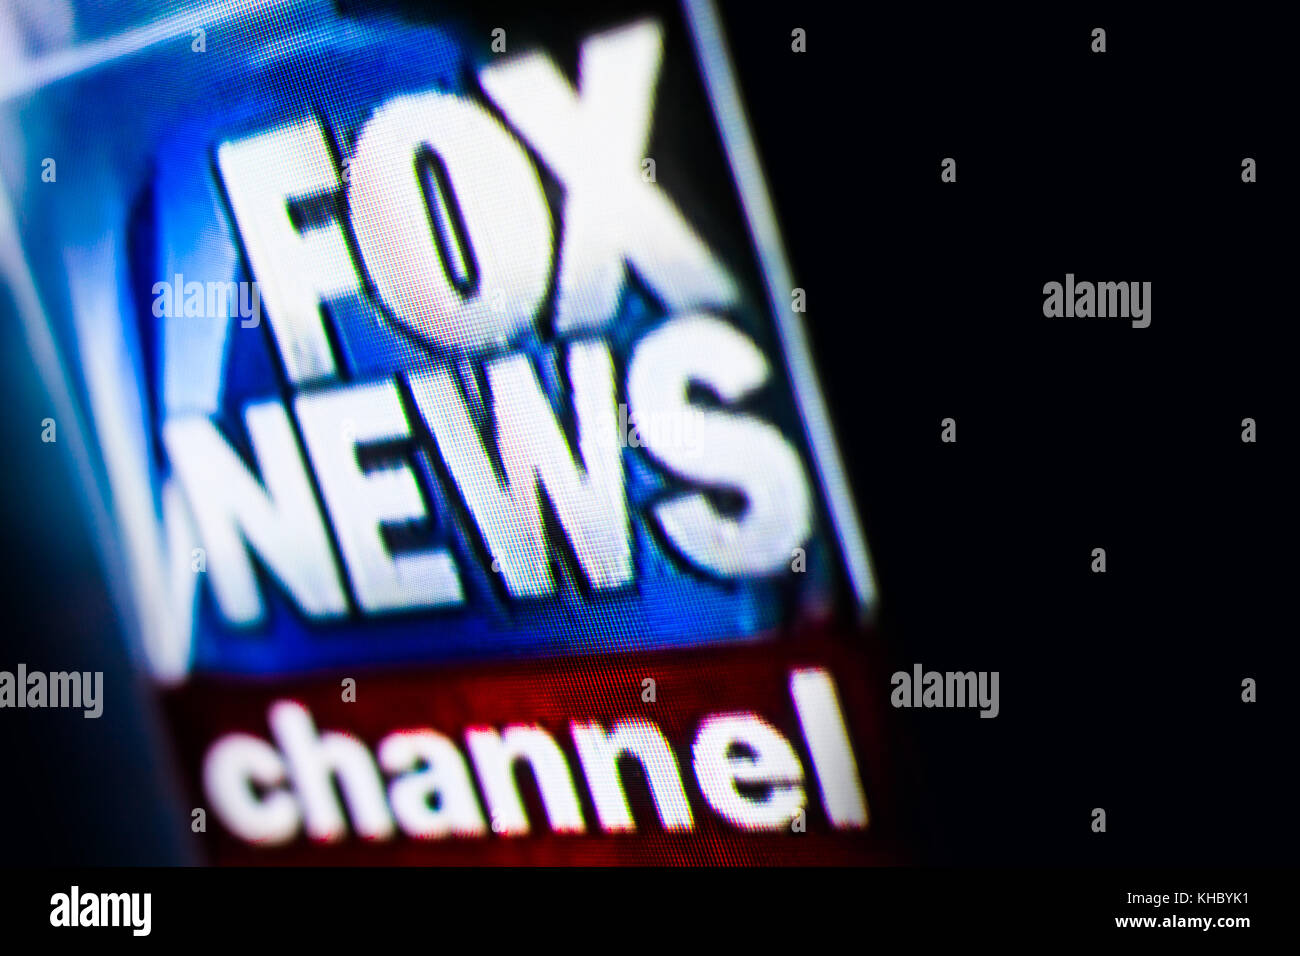 Fox News Channel Stock Photos & Fox News Channel Stock Images - Alamy